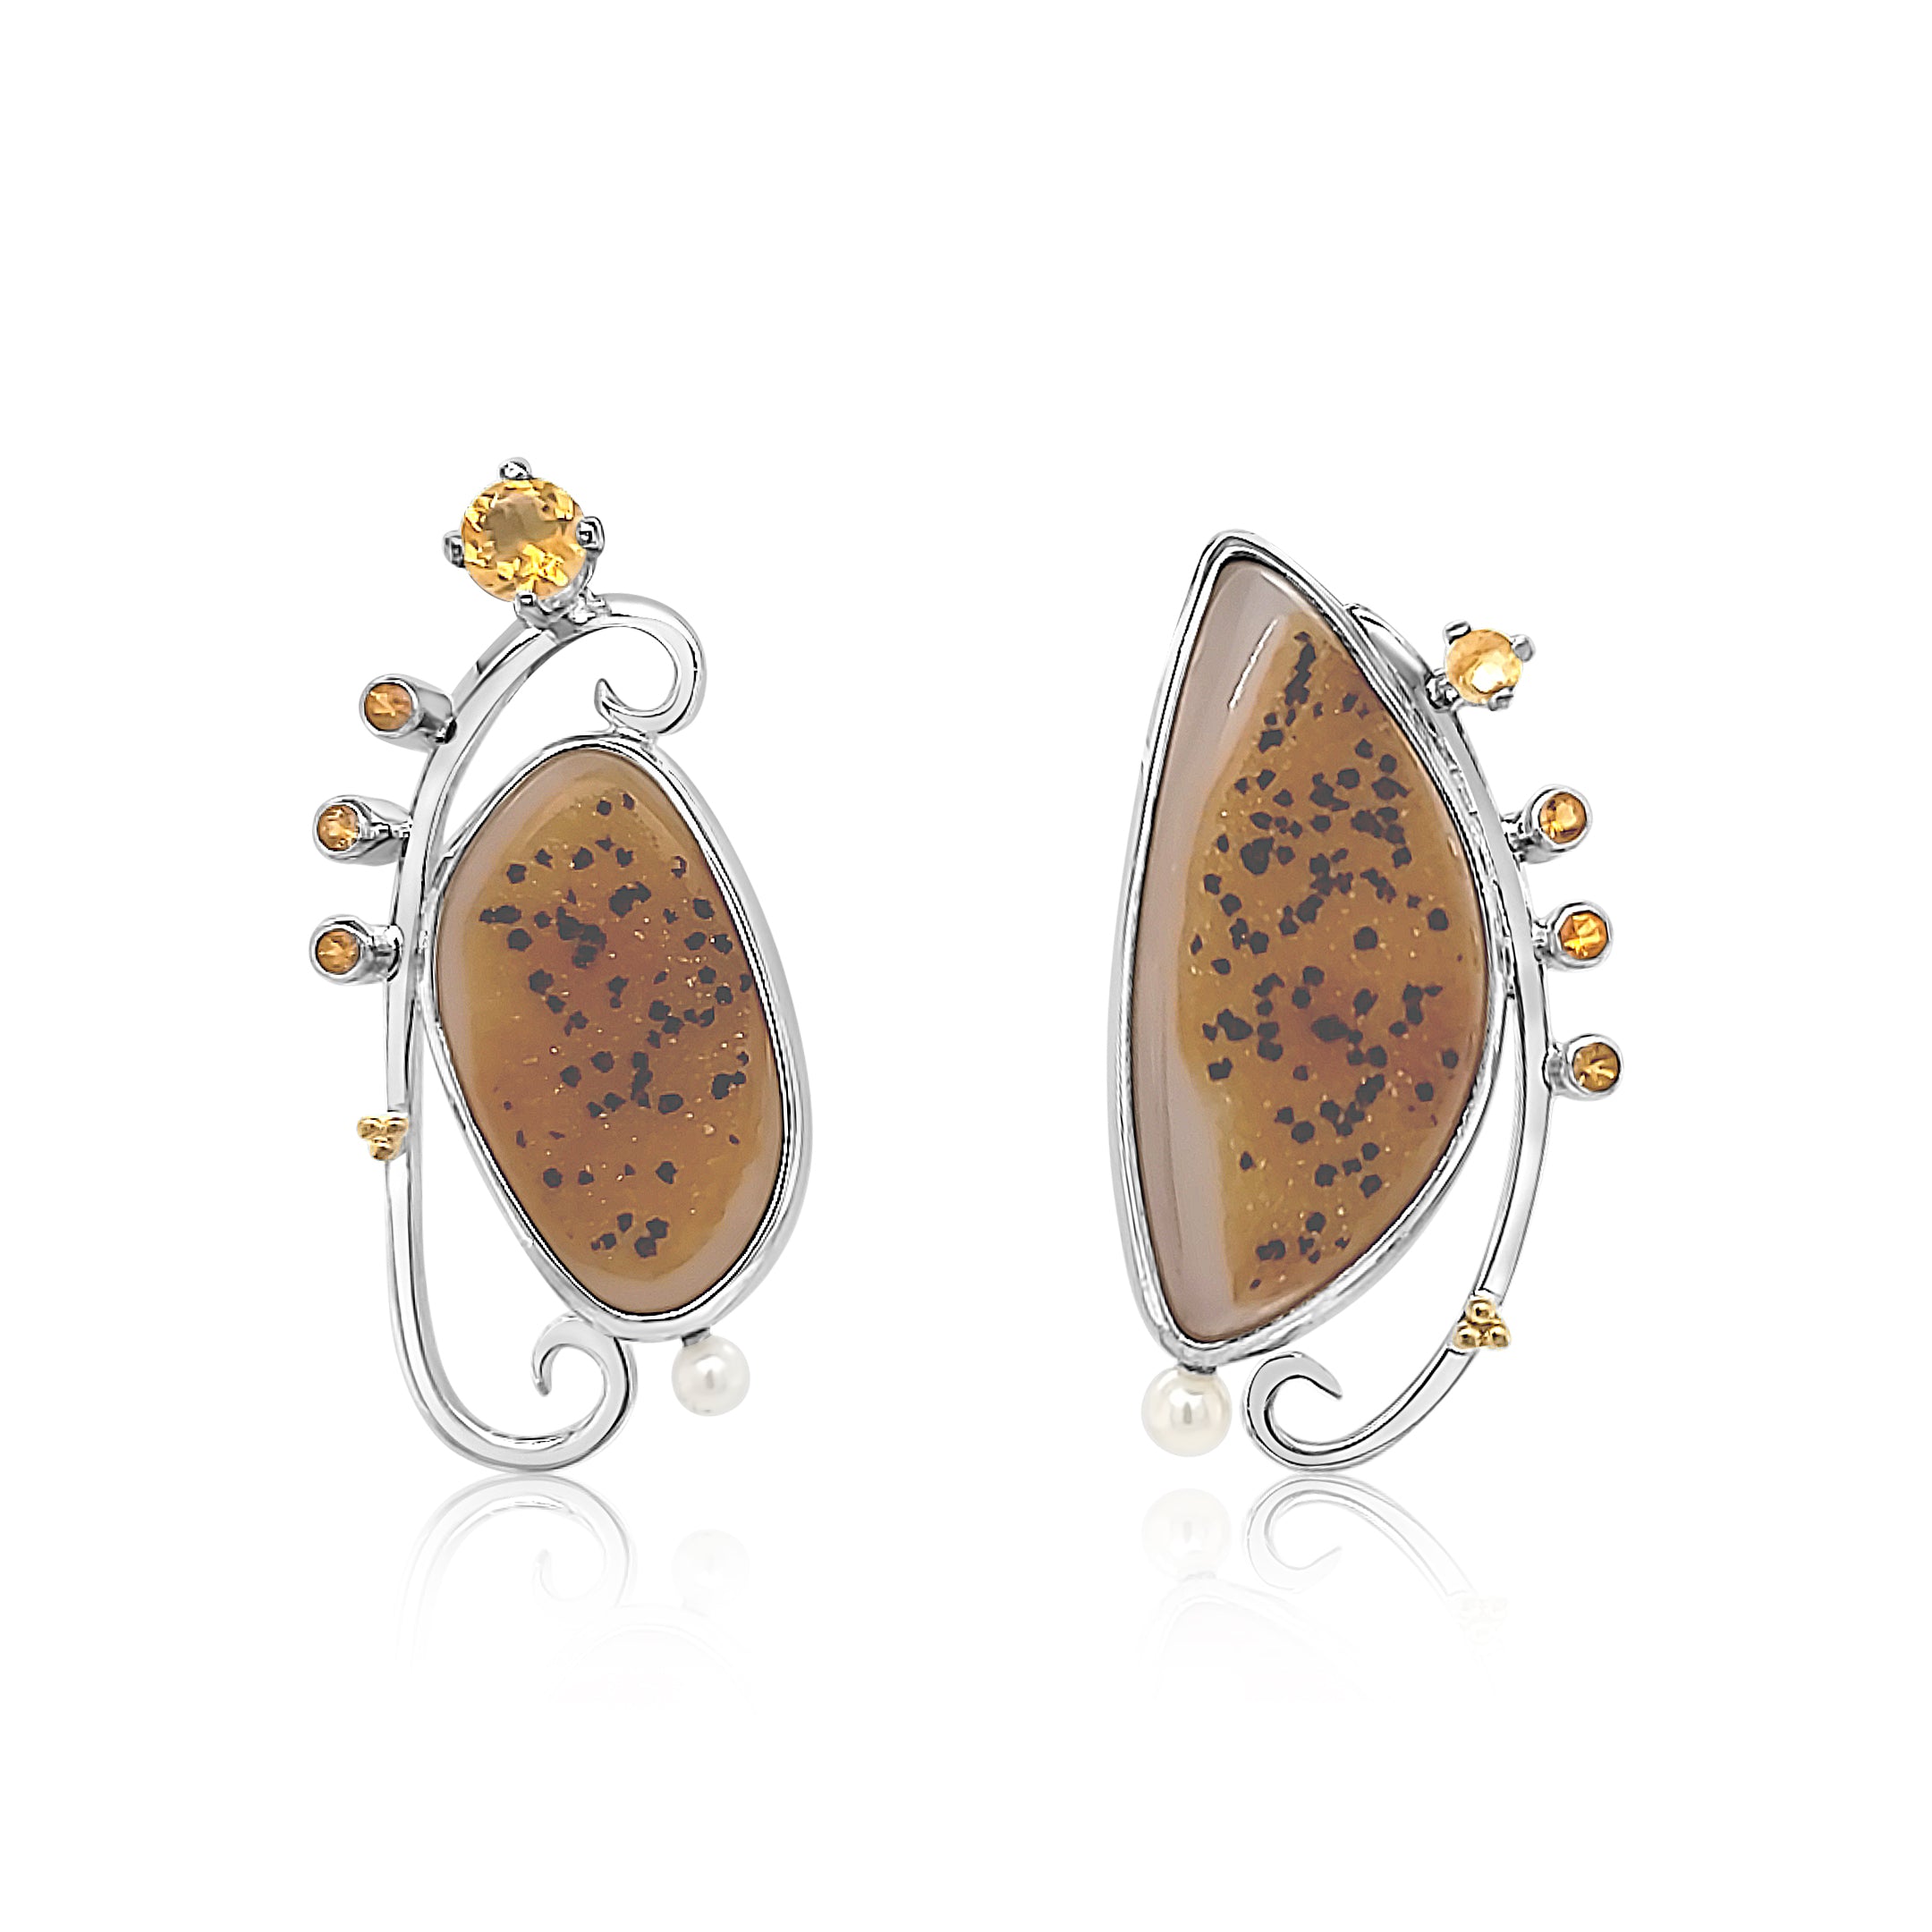 Agate Drusy Earrings with 22k Gold Accents